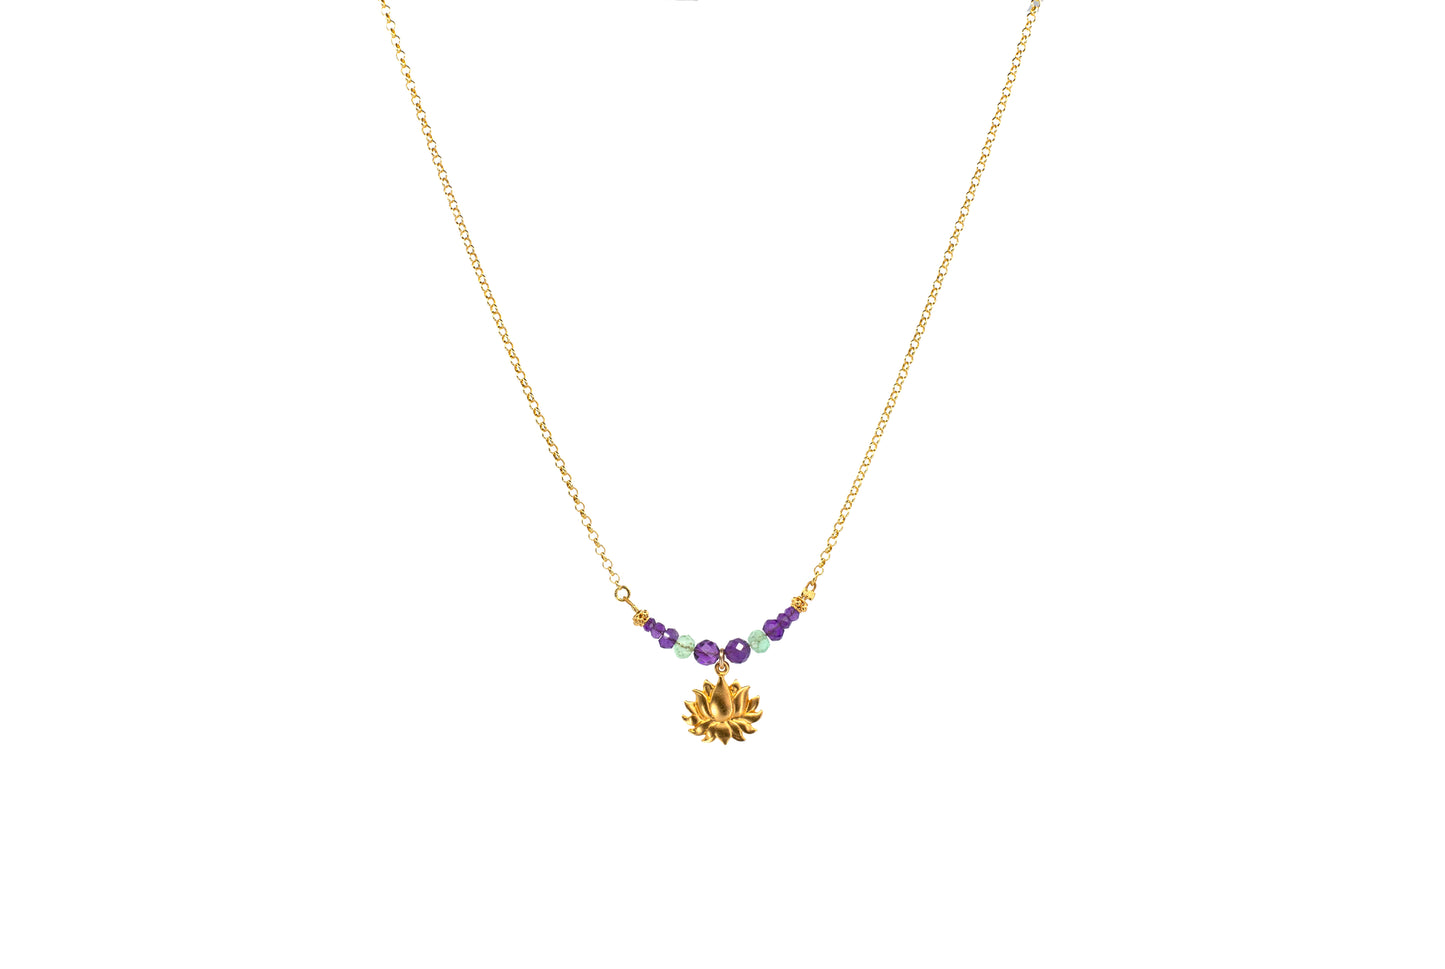 Golden Lotus Pendant with Amethyst and Emerald